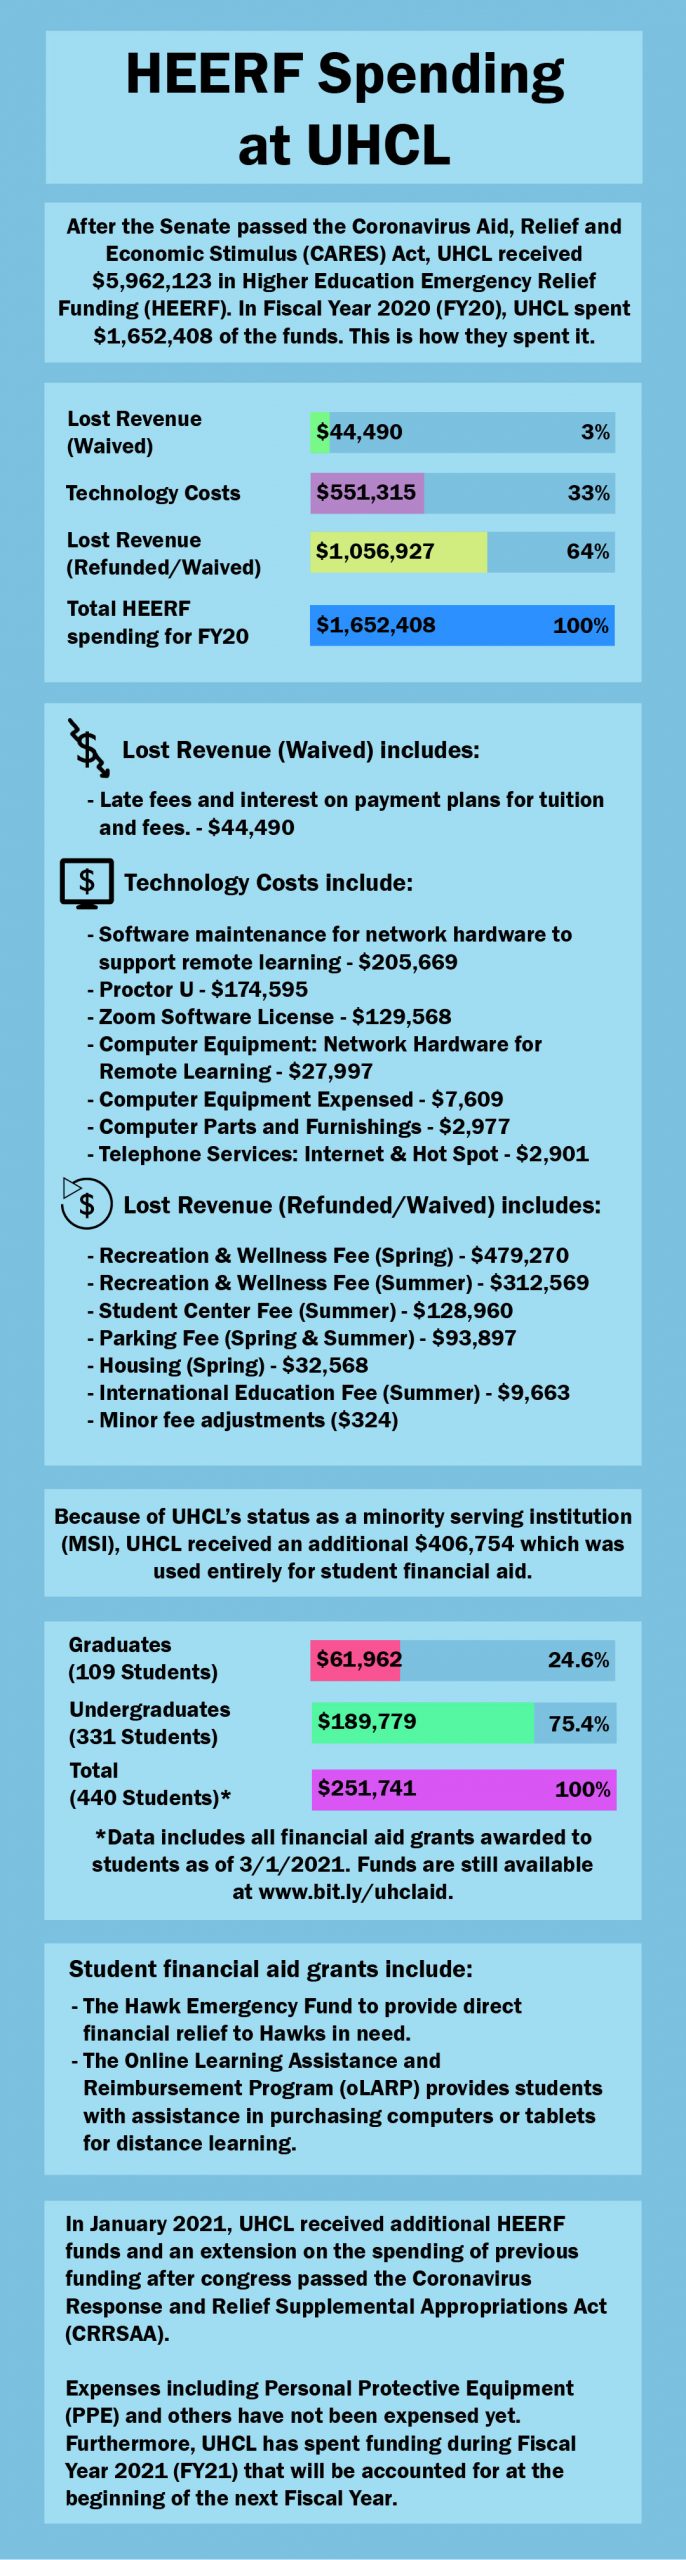 GRAPHIC: HEERF spending at UHCL for FY20. Graphic by The Signal Executive Editor Miles Shellshear.